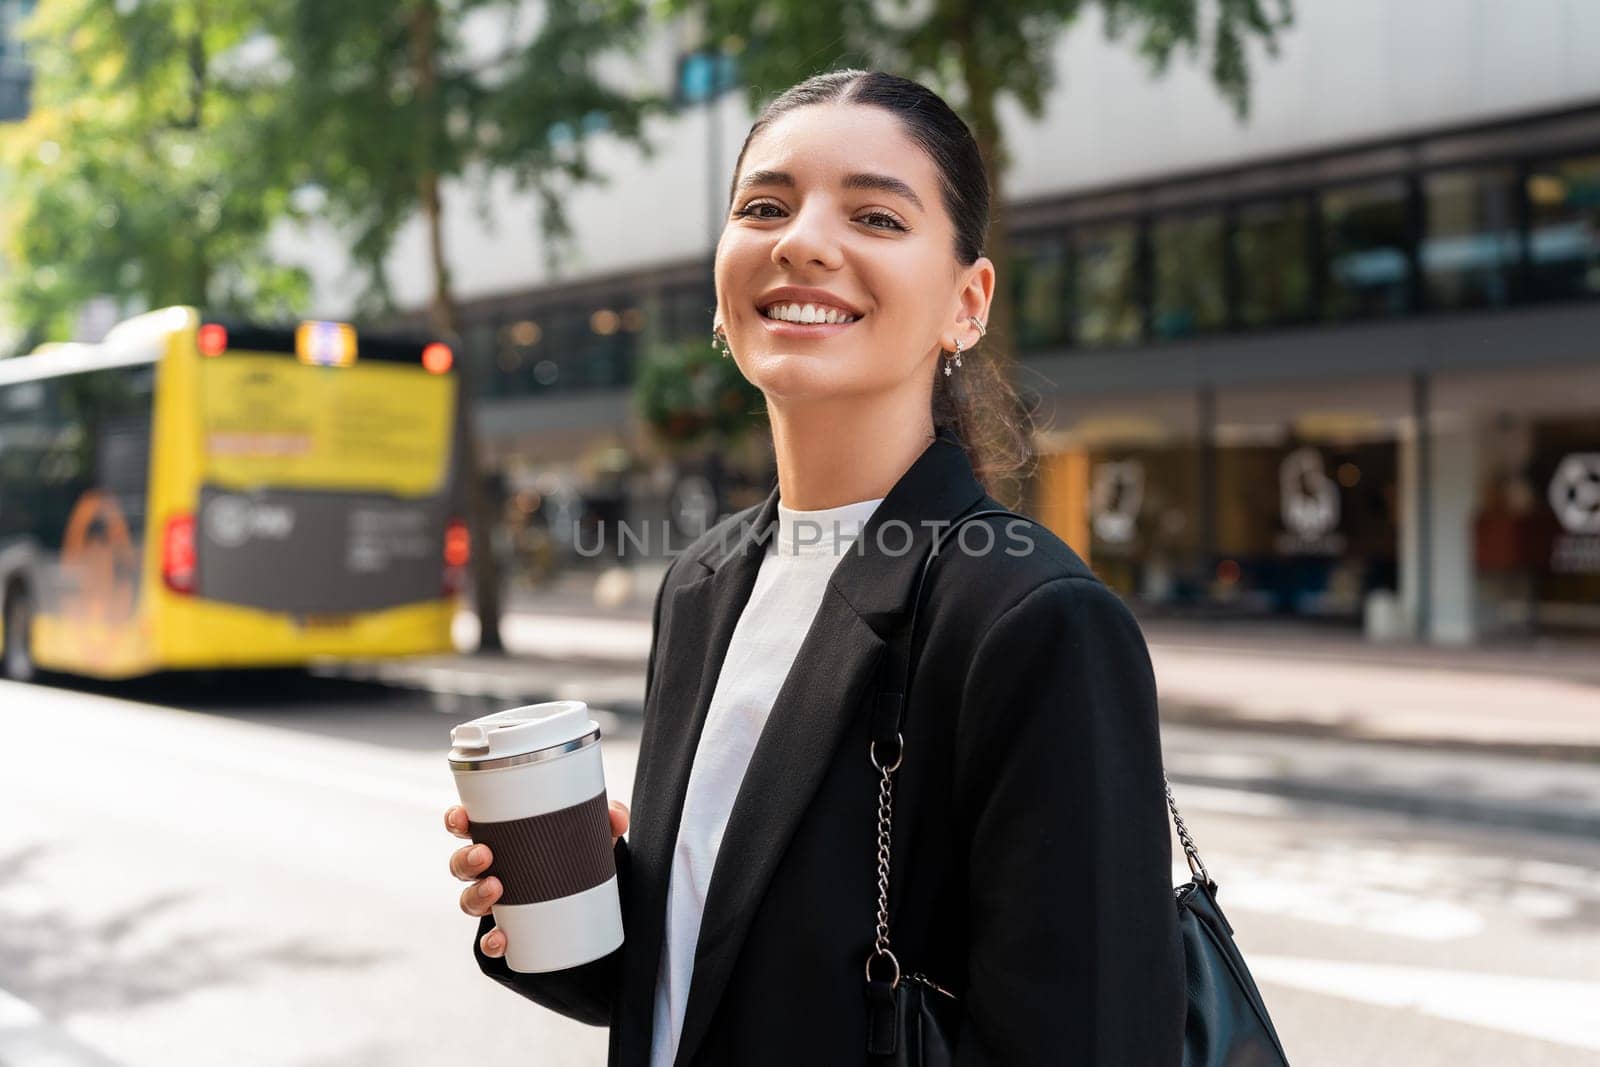 Ready for the day. Cheerful multiracial businesswoman in city street holding a thermo mug.